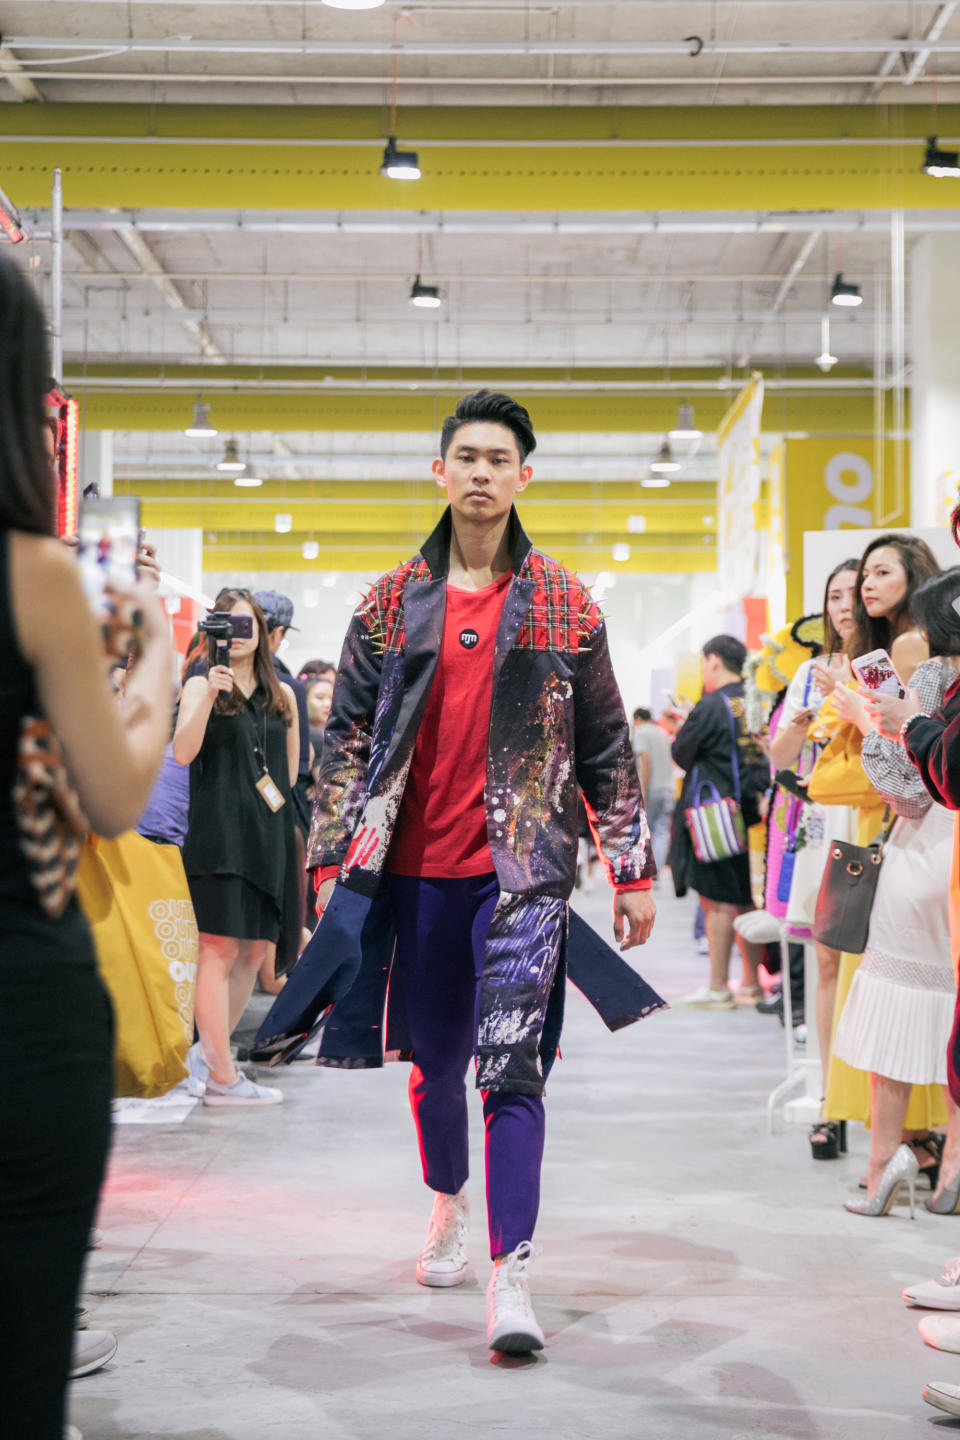 OUTSIDER fashion art festival takes place at a supermarket in Singapore